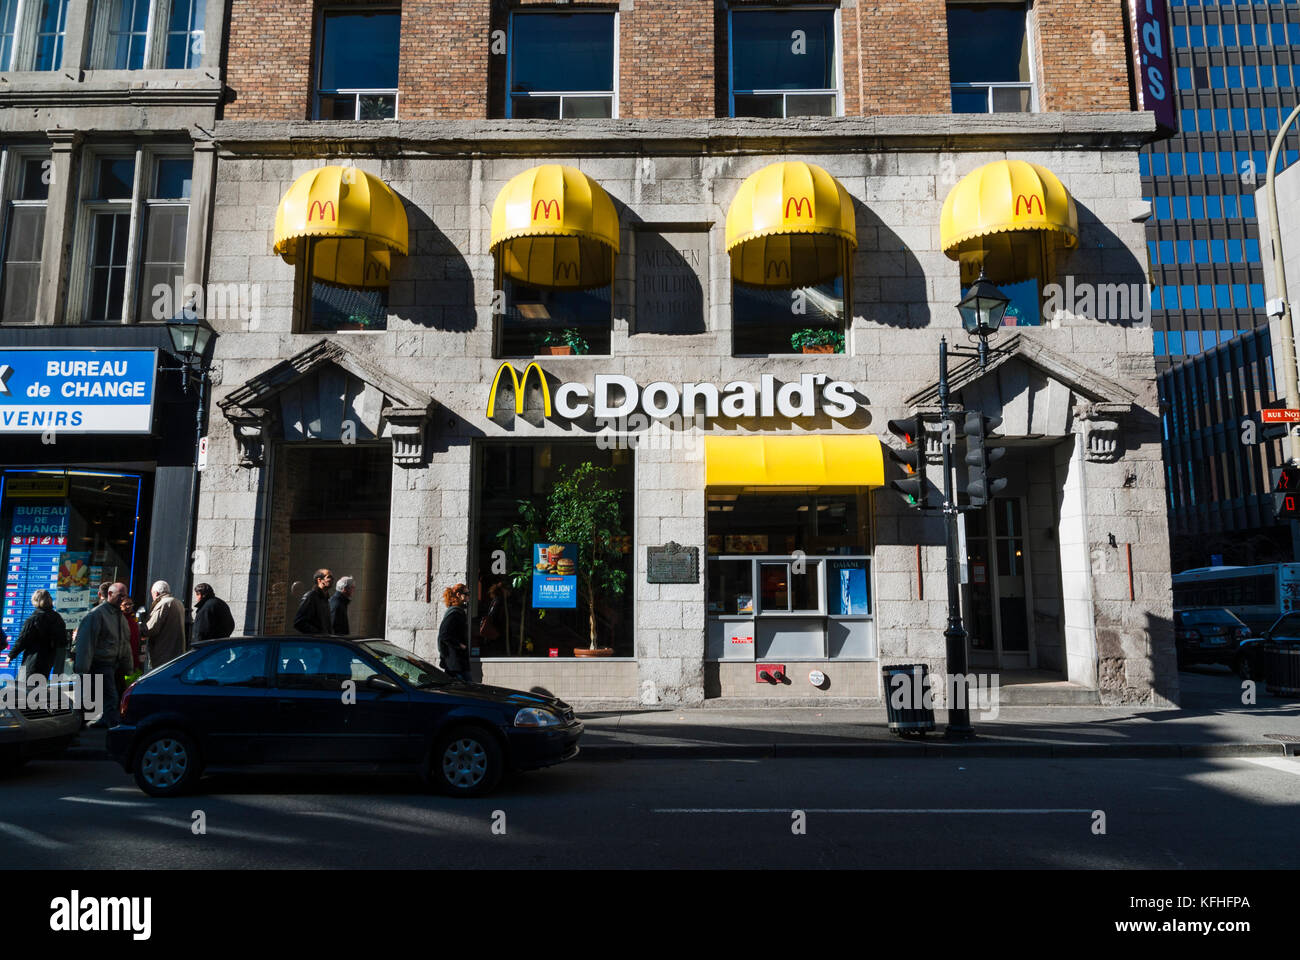 McDonald's restaurant, Notre-Dame Street West, Old Montreal, Quebec, Canada Stock Photo